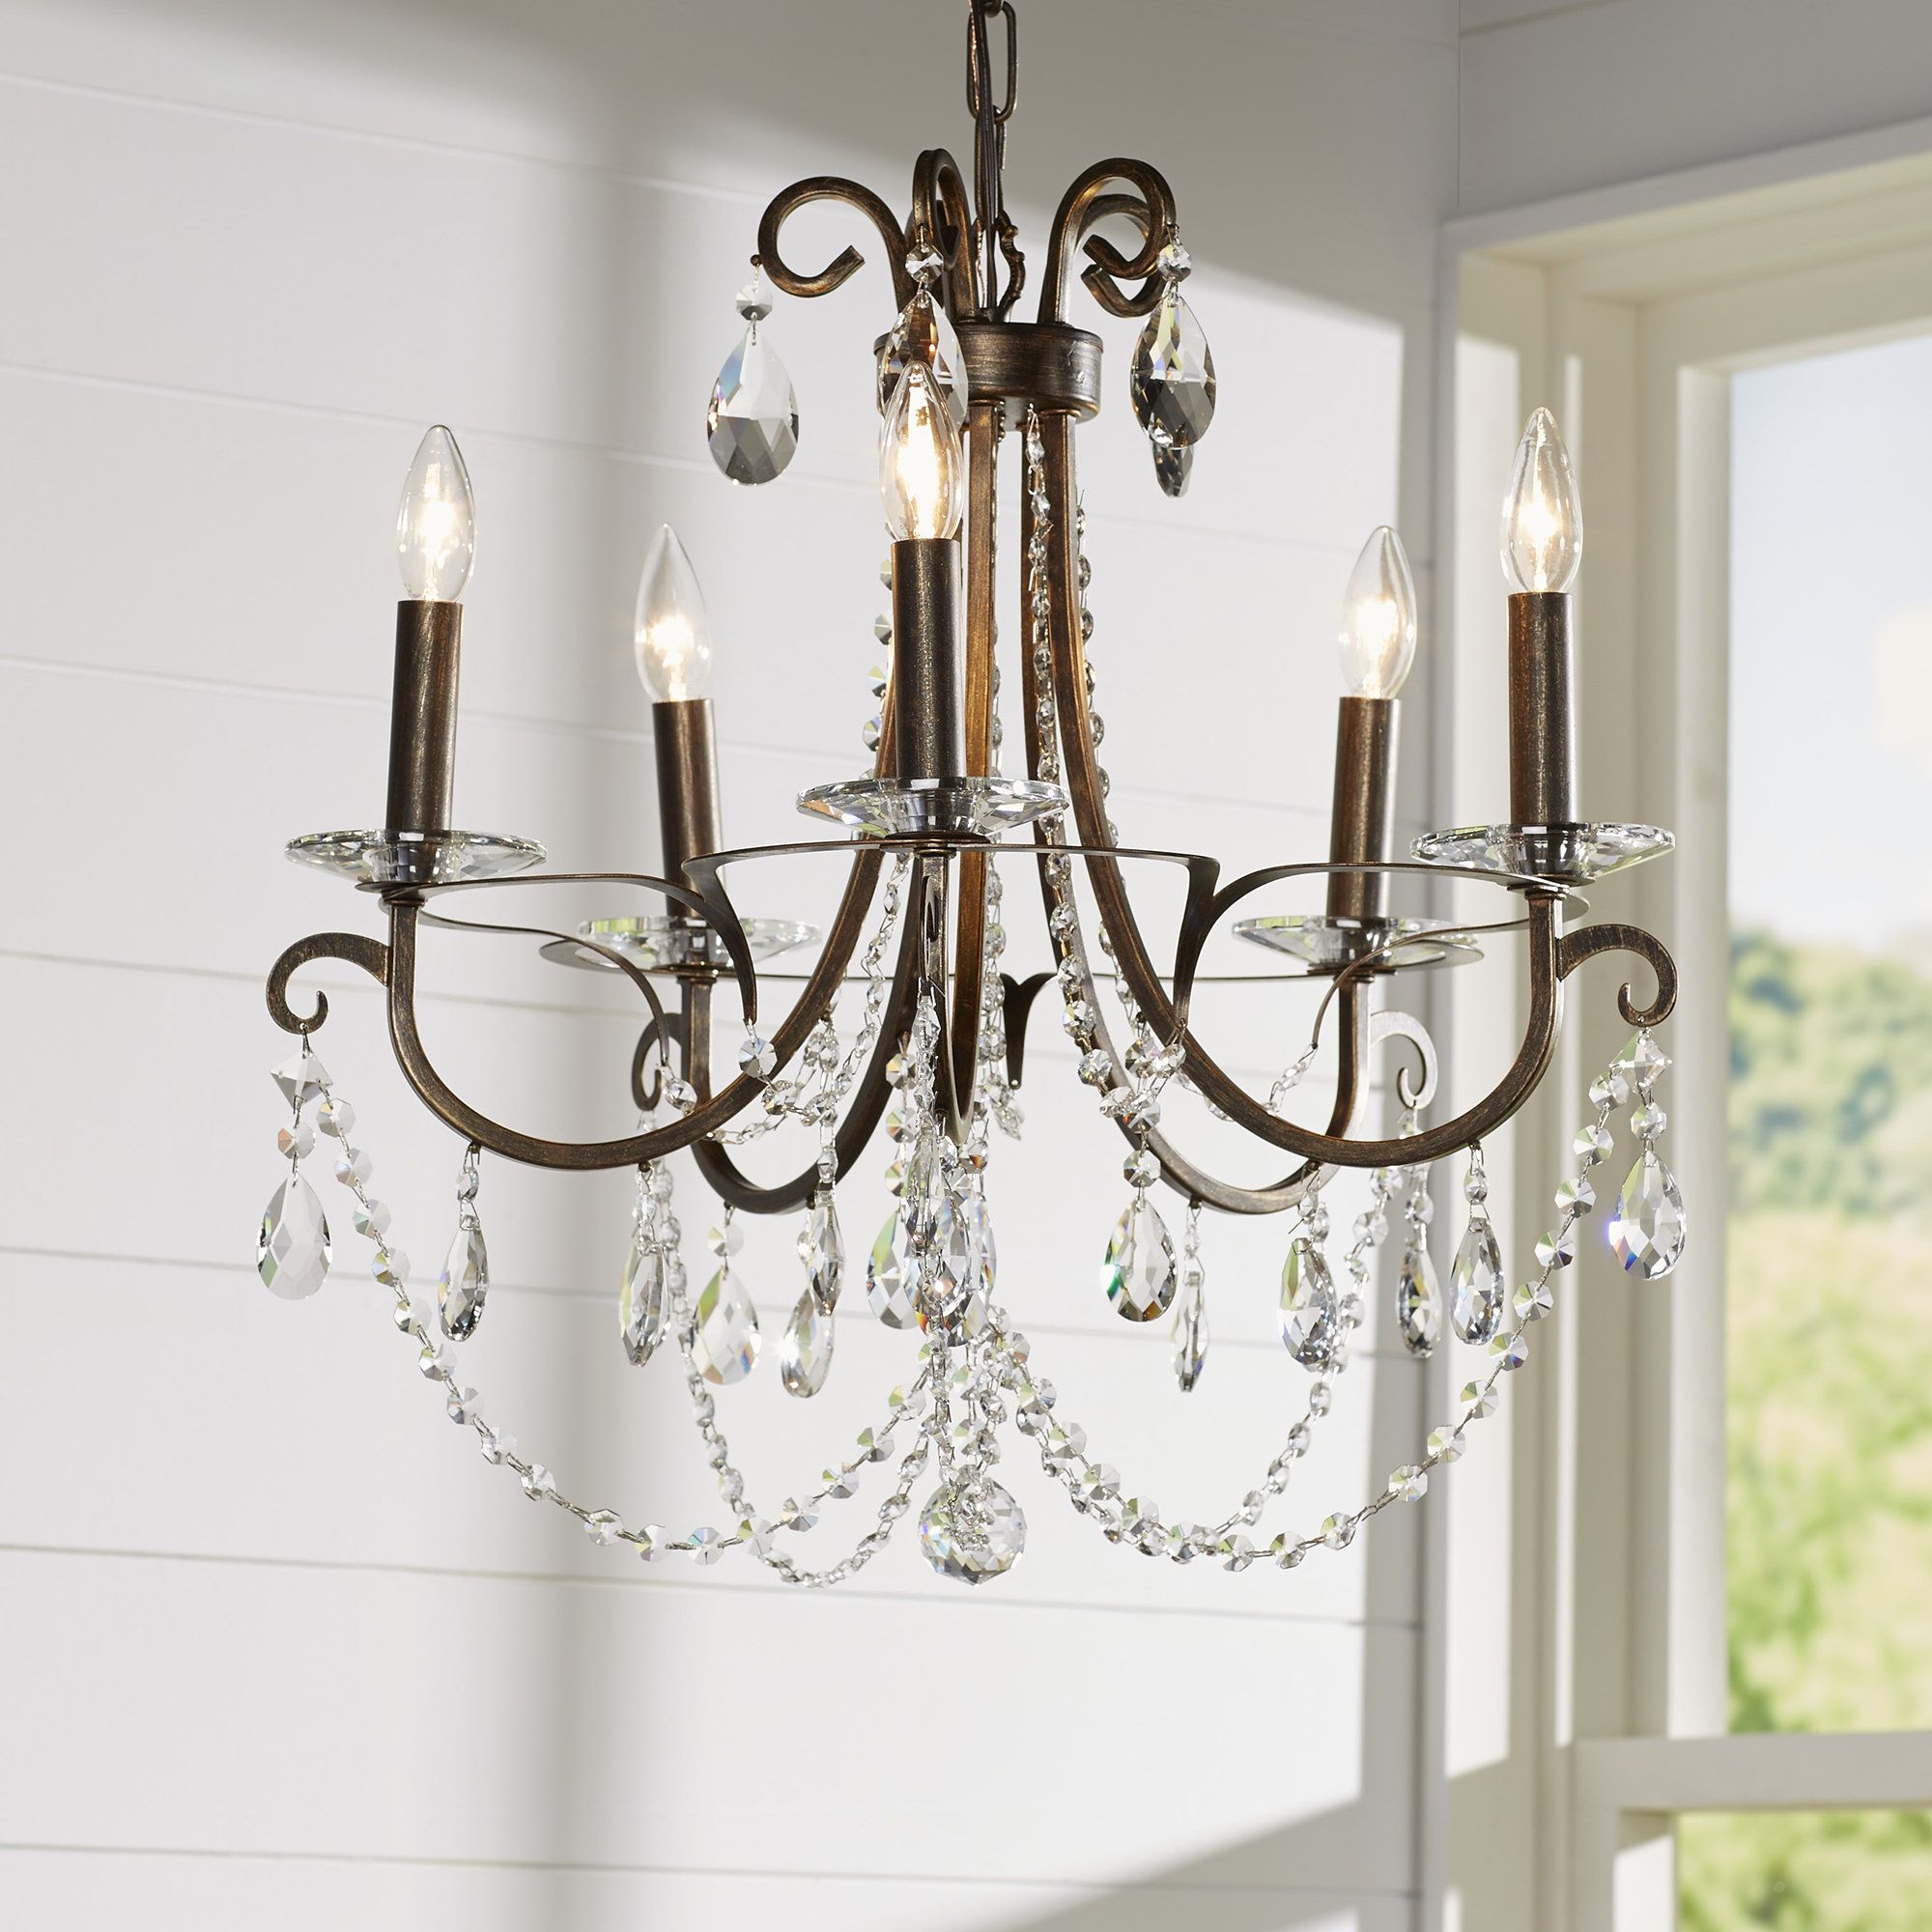 Famous Roesler 5 Light Candle Style Chandelier In Blanchette 5 Light Candle Style Chandeliers (View 5 of 25)